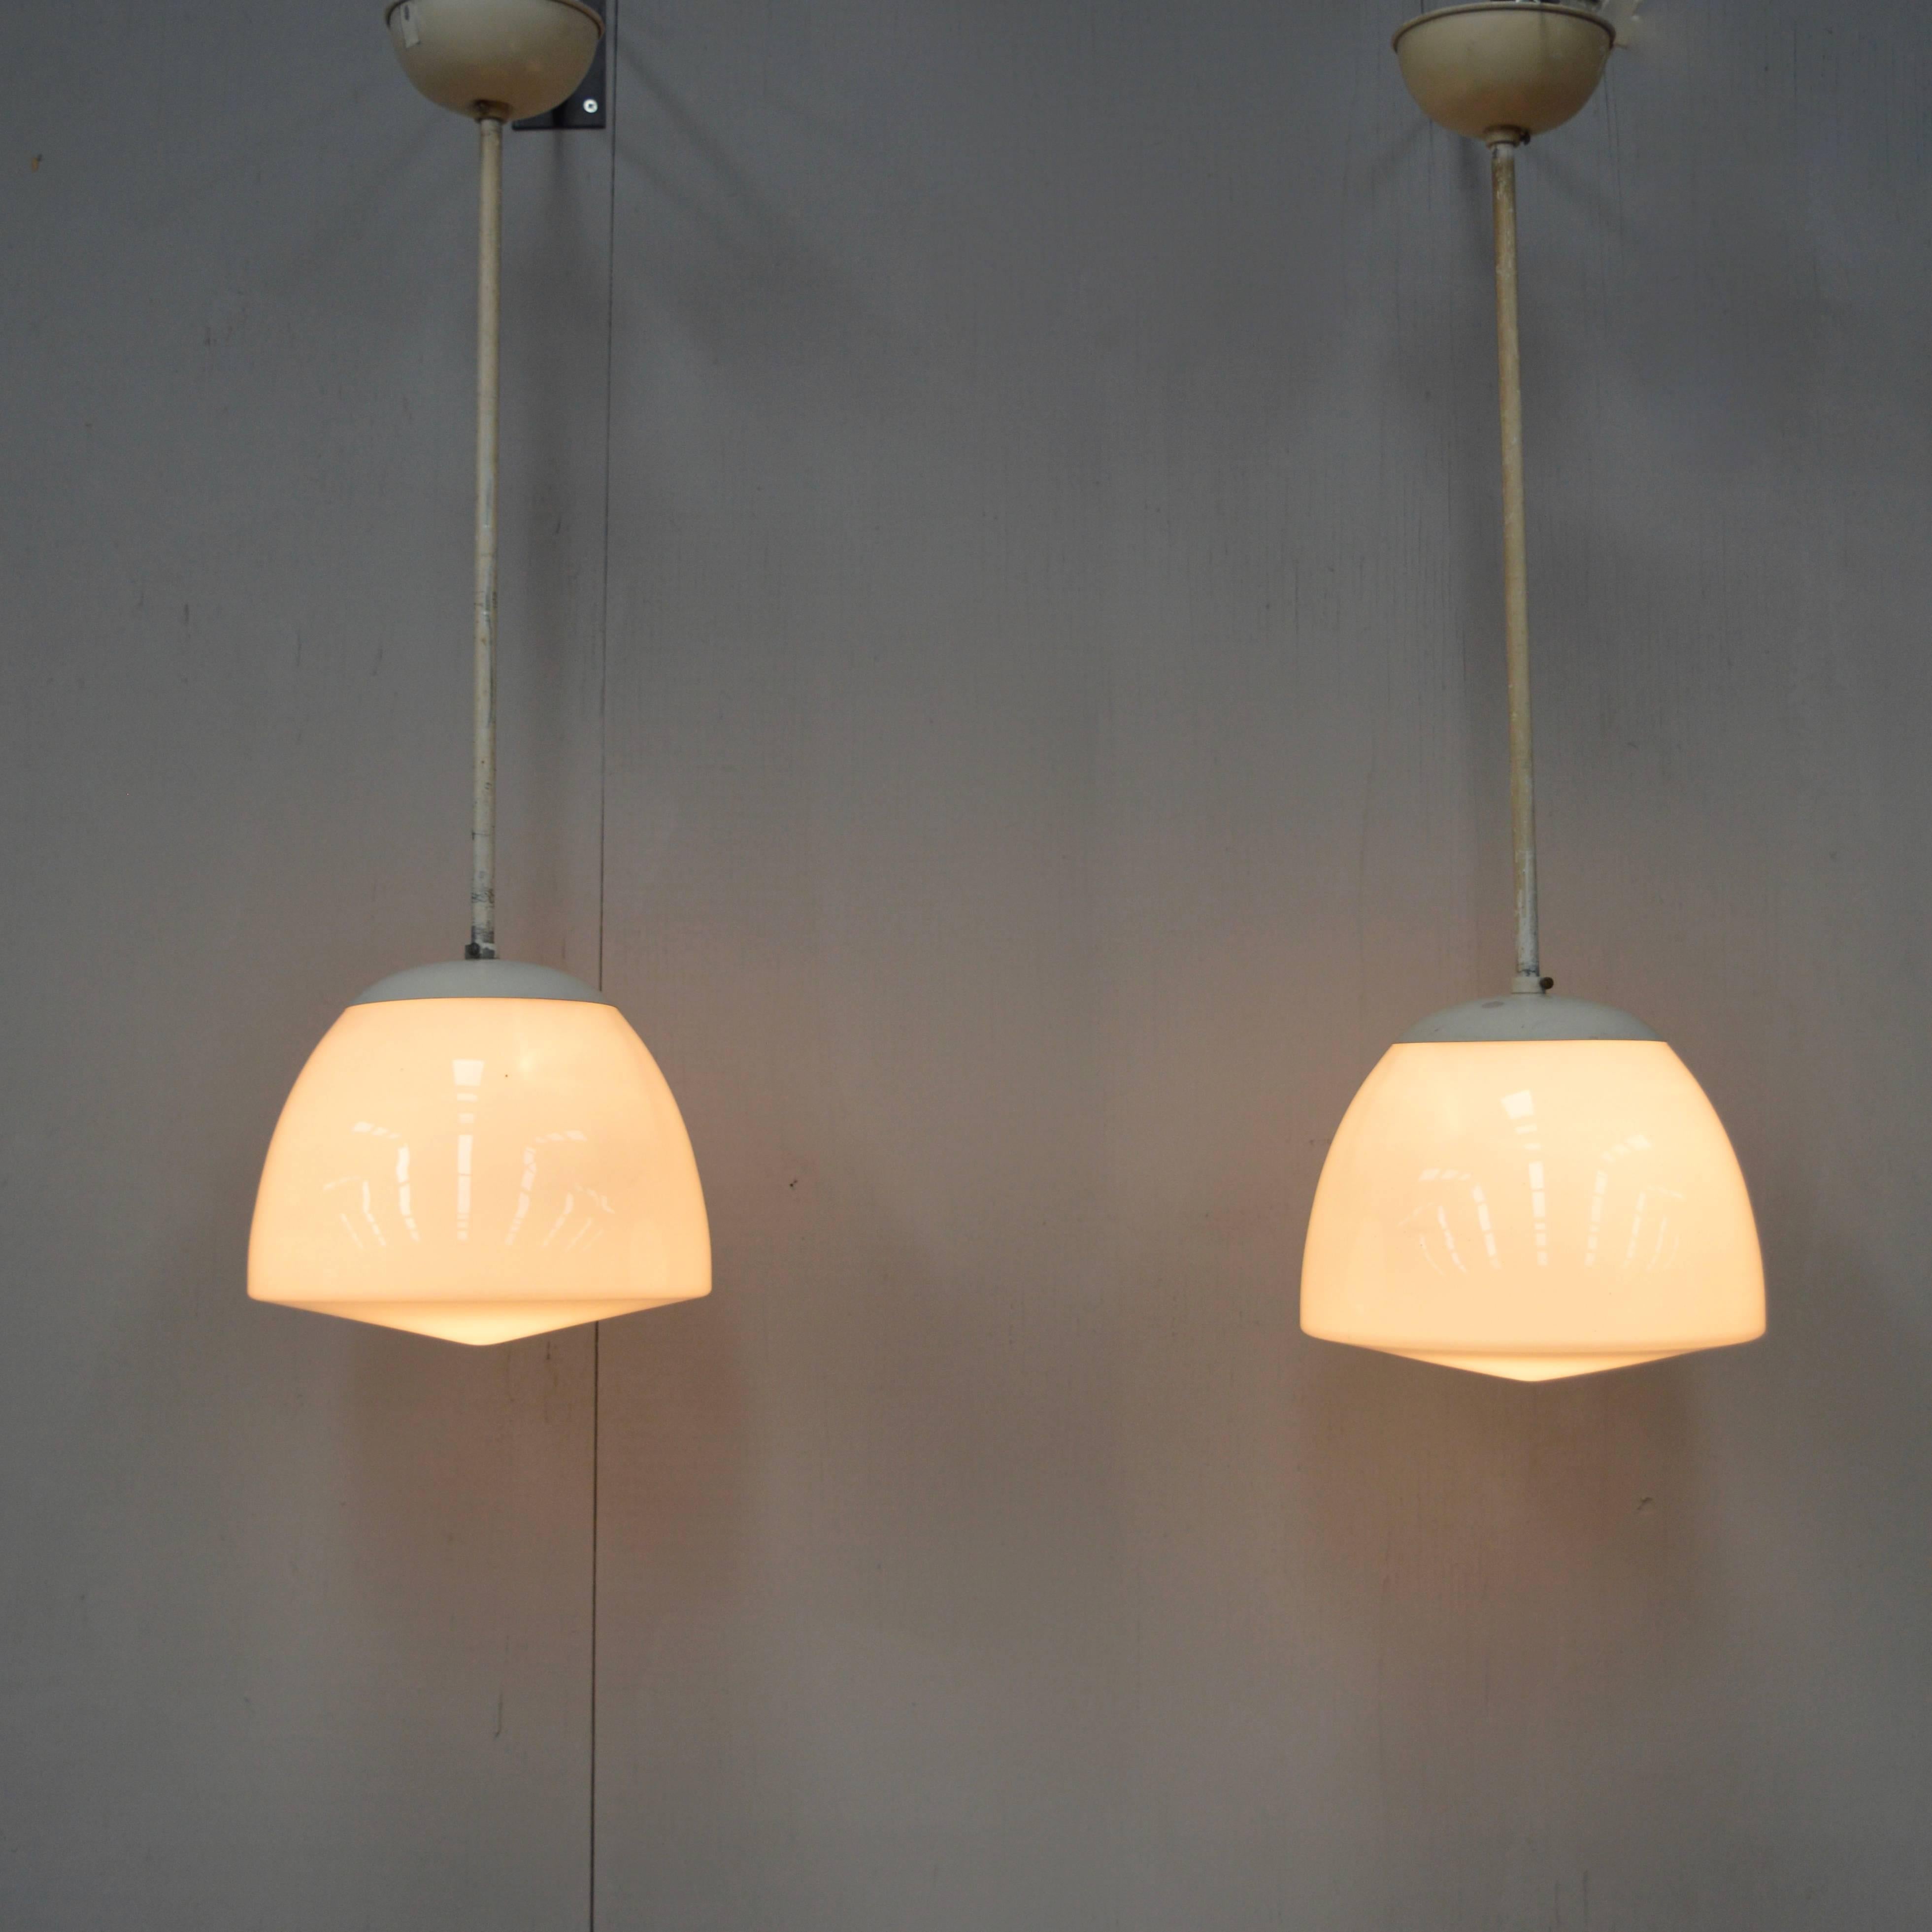 Pair of Early Gispen Pendant Lamps, Netherlands, 1930s-1940s For Sale 3